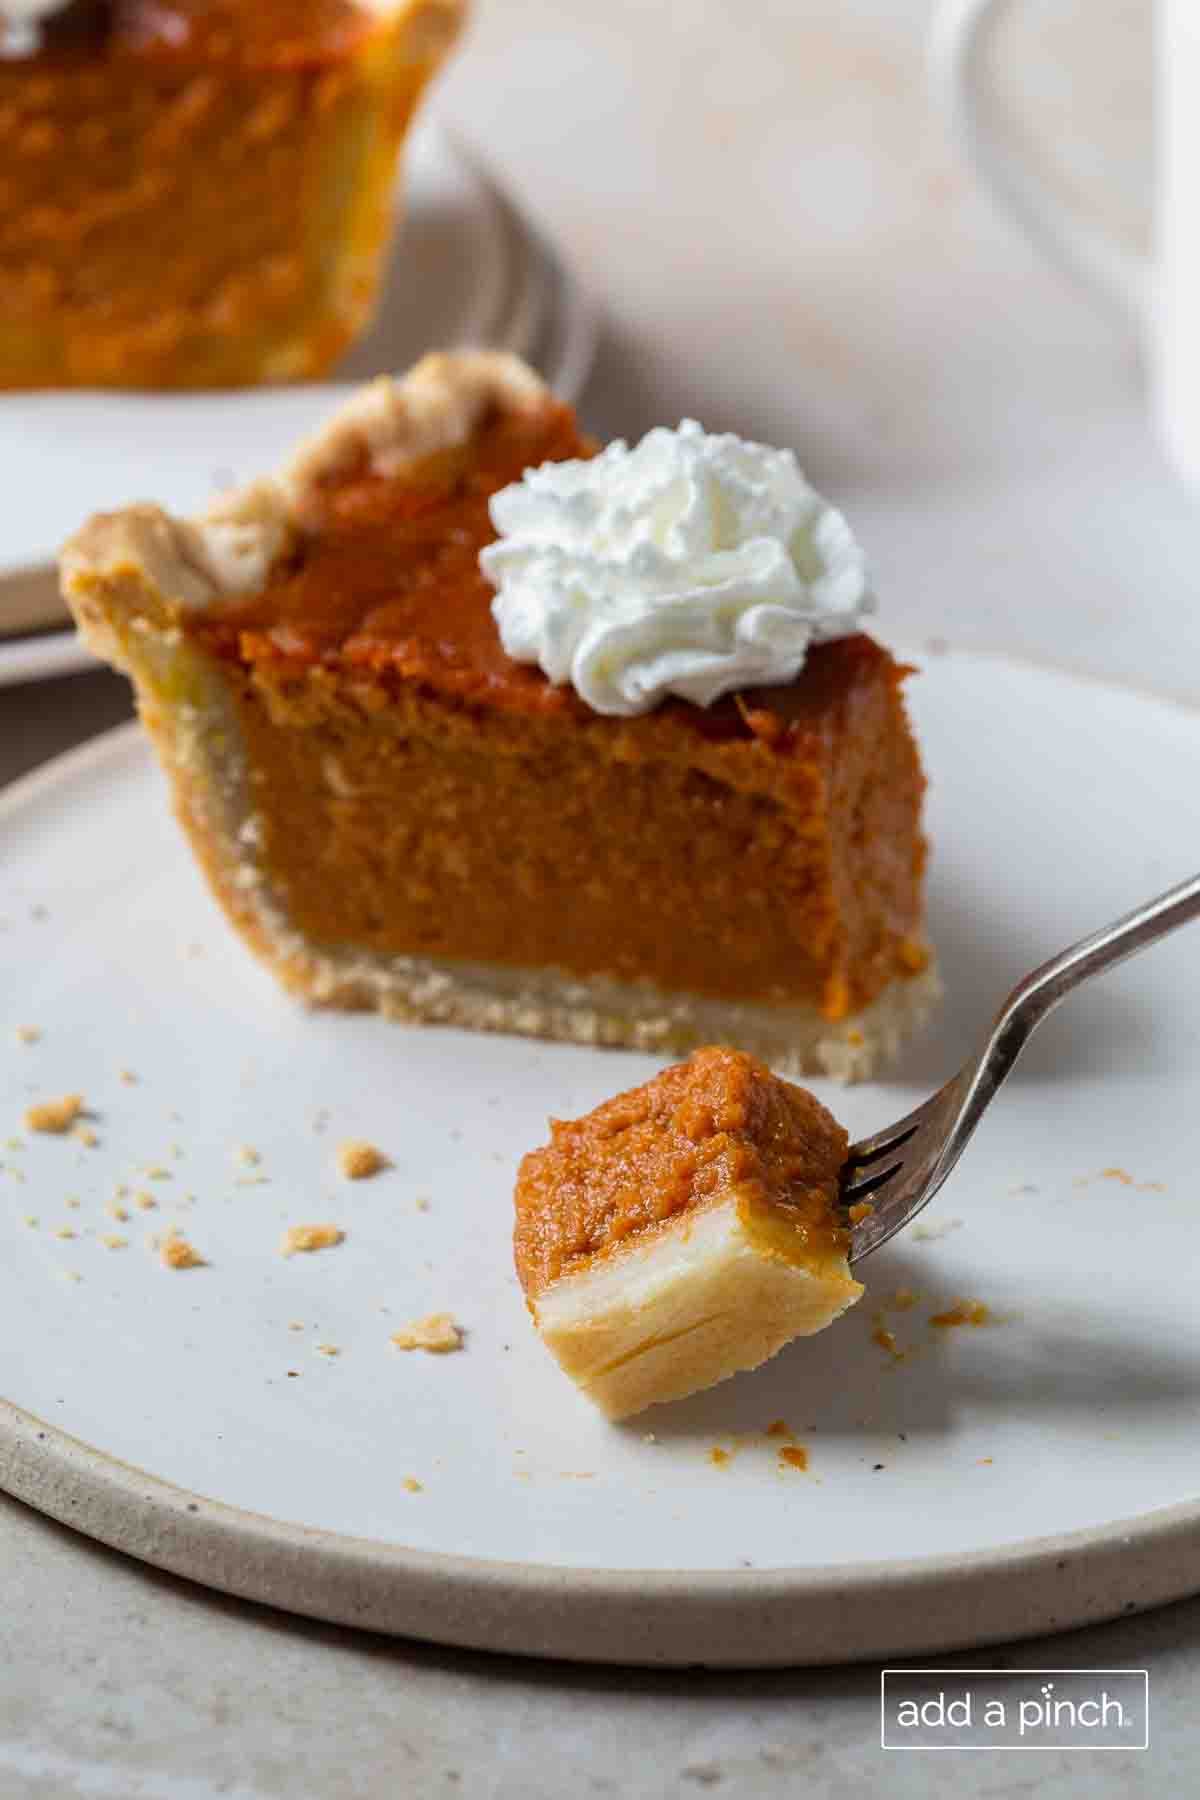 Slice of pumpkin pie with whipped cream on top with a bite cut onto a fork, surrounded by scattered pie crust crumbs, on a white plate - addapinch.com